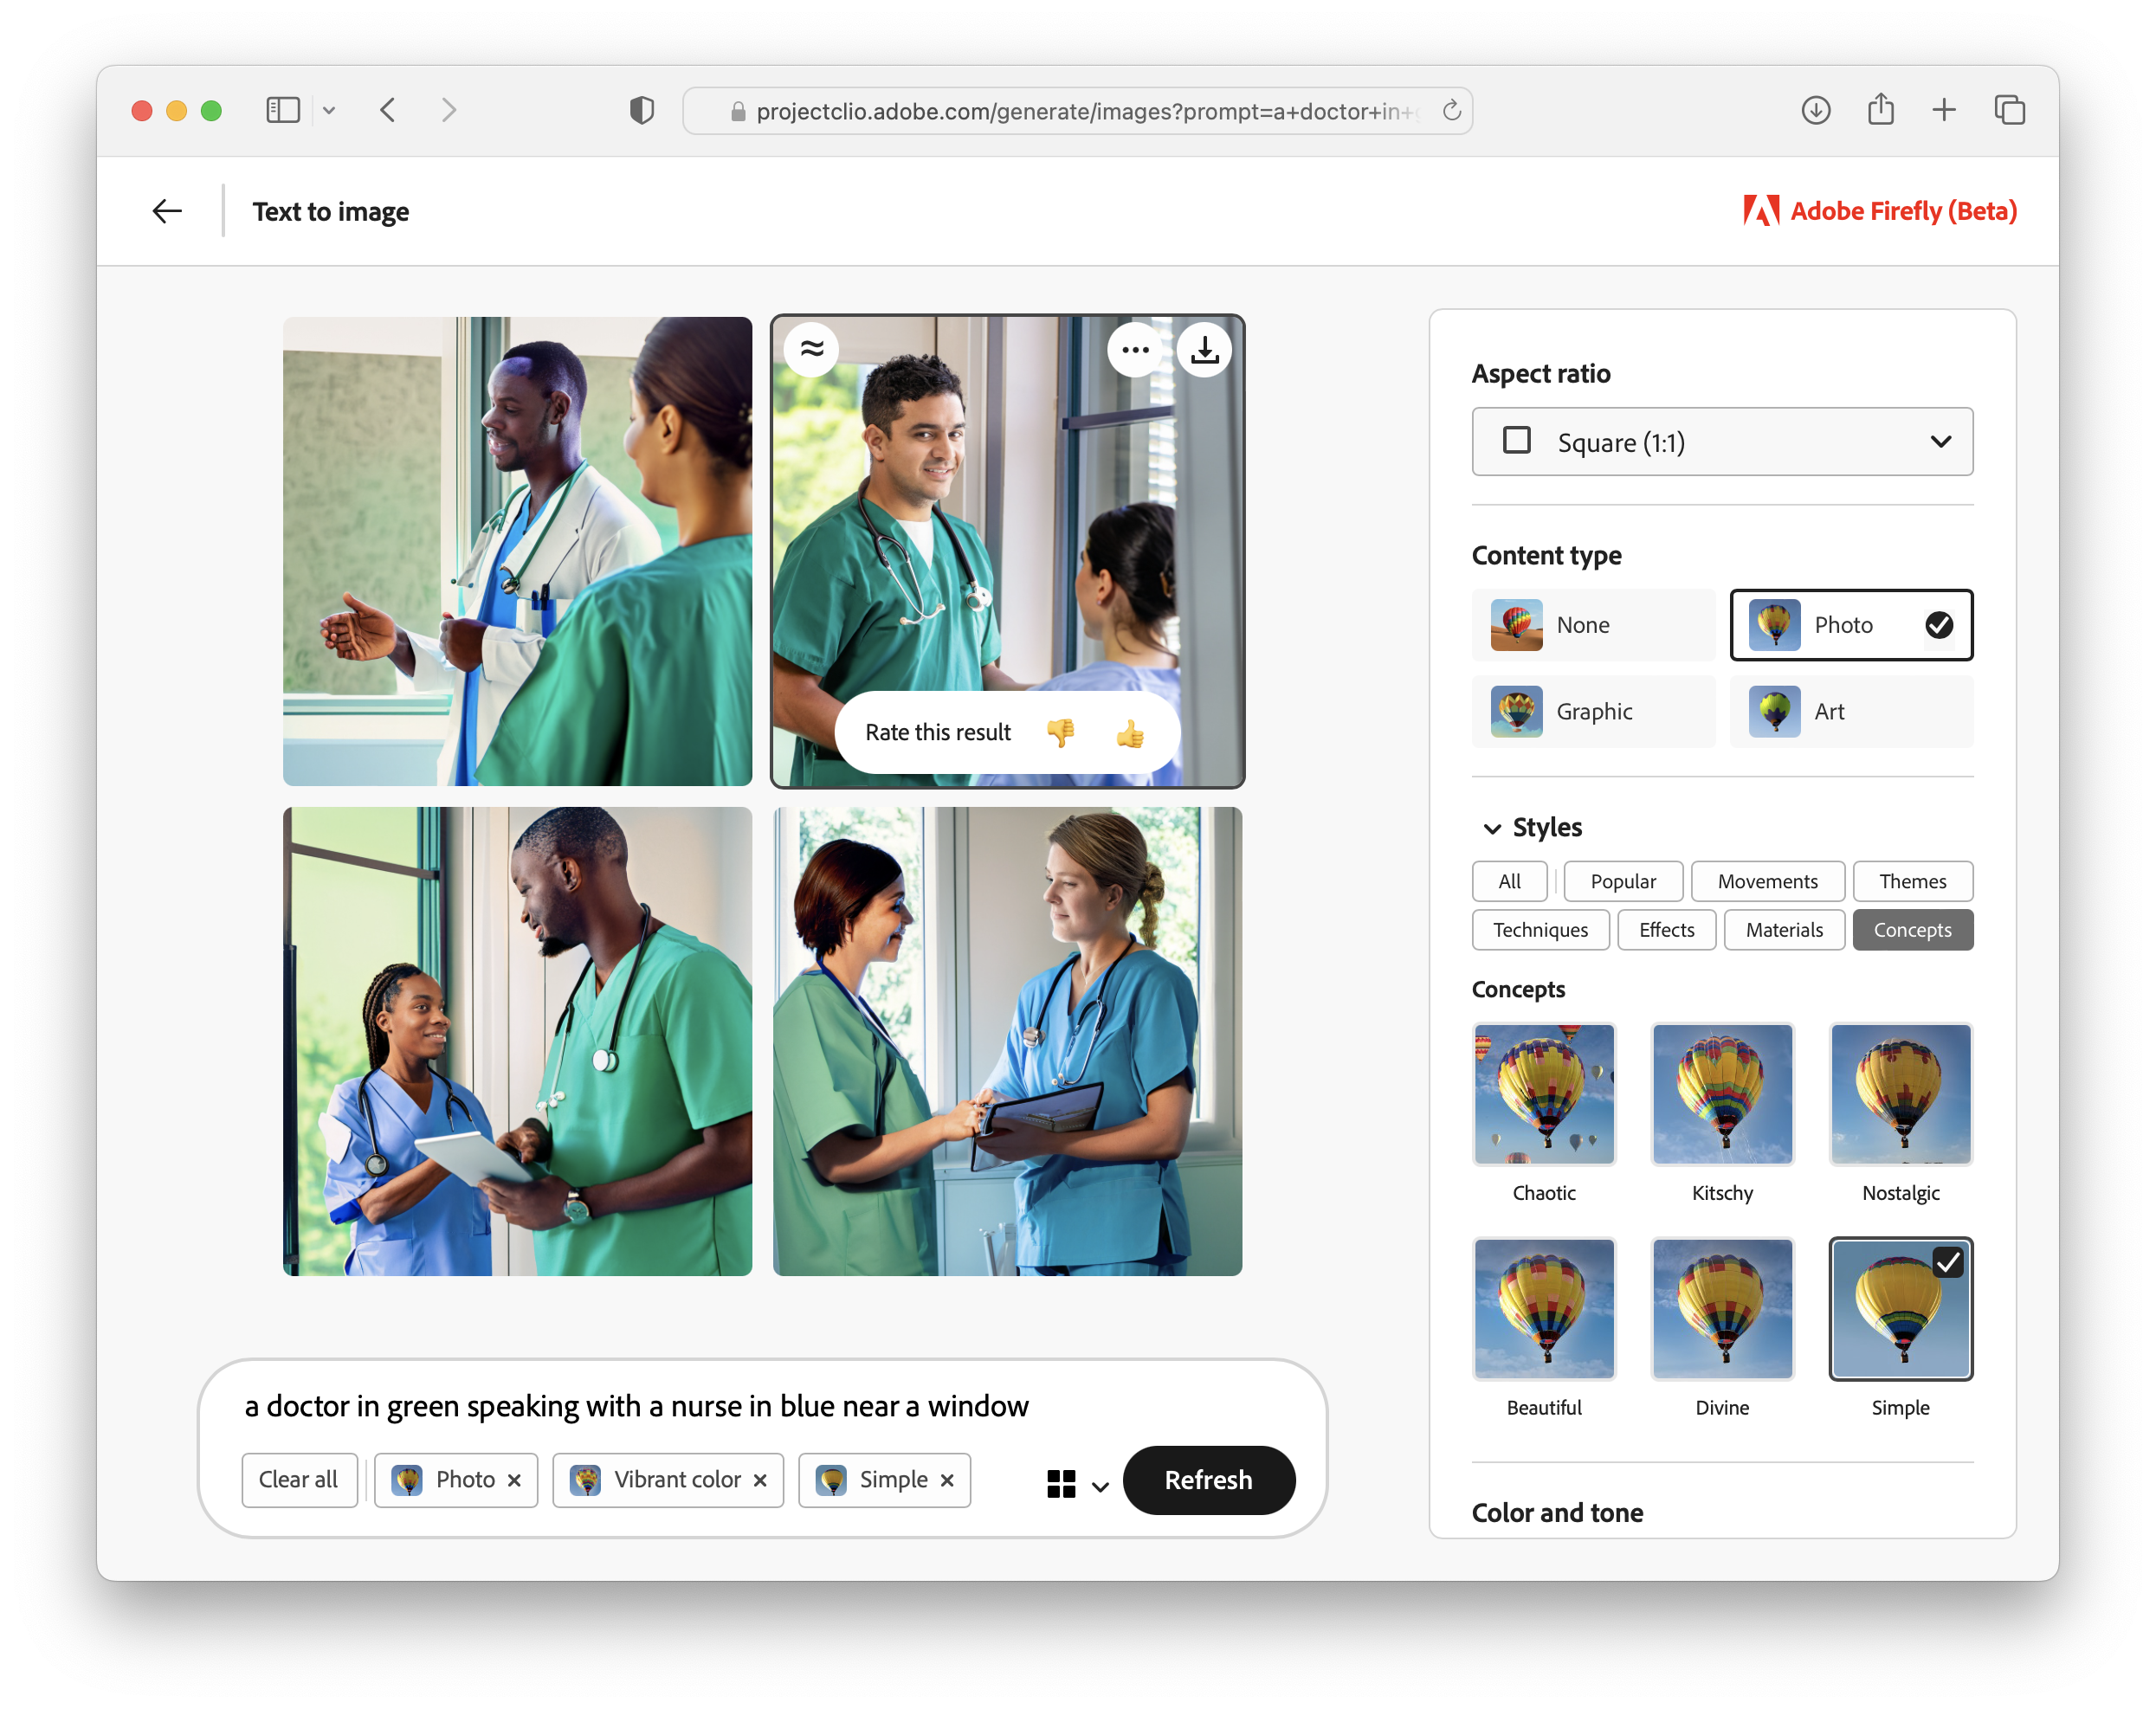 Adobe Firefly screenshot showing a batch of four photos generated by the prompt "a doctor in green speaking with a nurse in blue near a window"